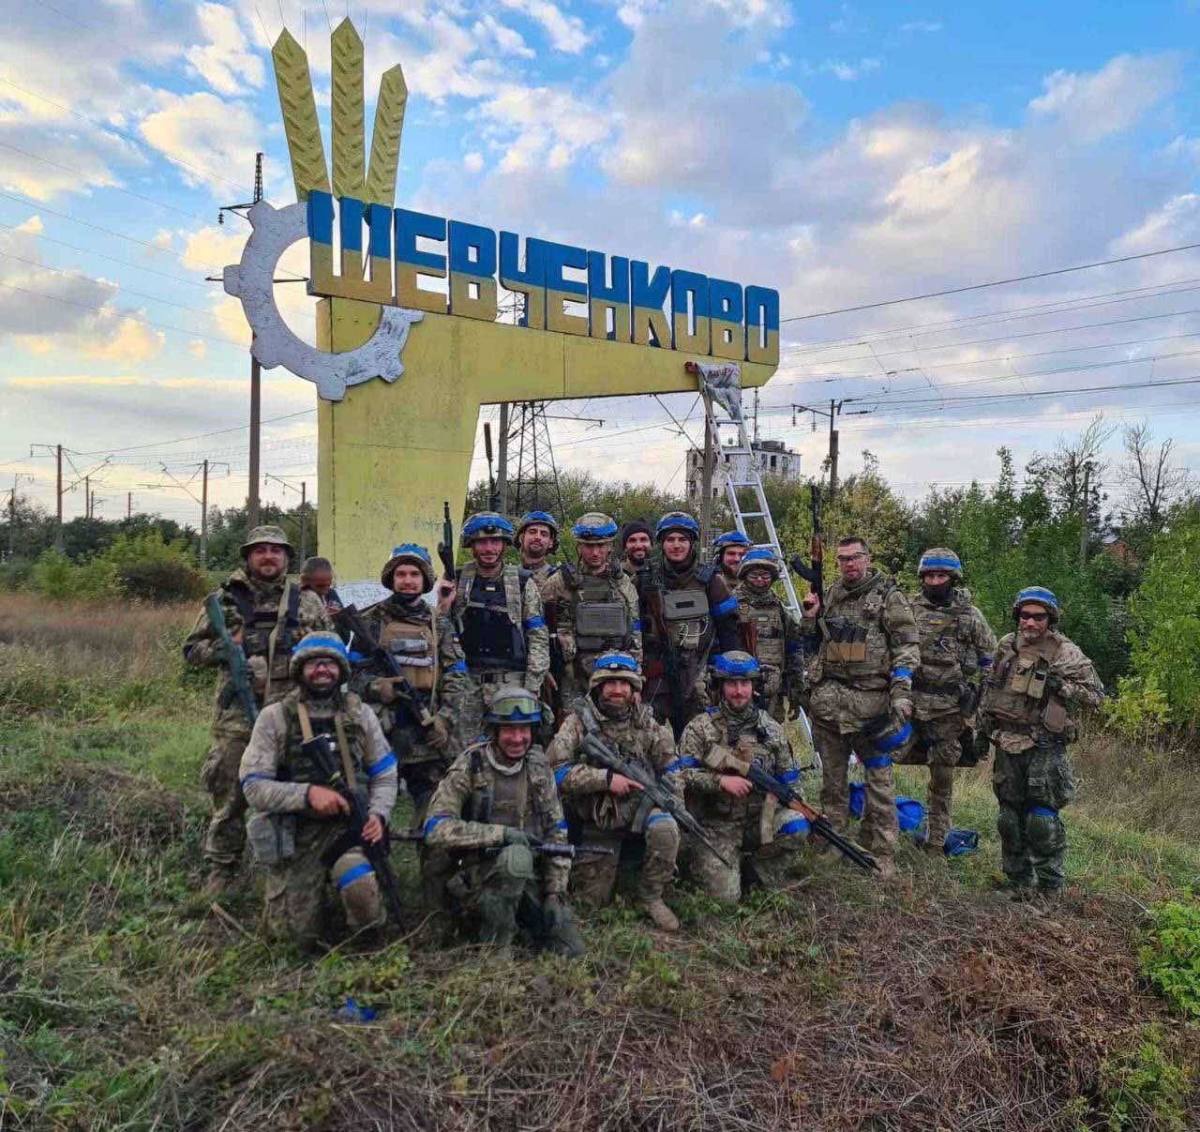 Ukrainian Territorial Defense soldiers in front of Shevchenkove. These have been shown to be rather effective given their high motivation, very useful at supporting the regular army and providing the base for future military expansion 